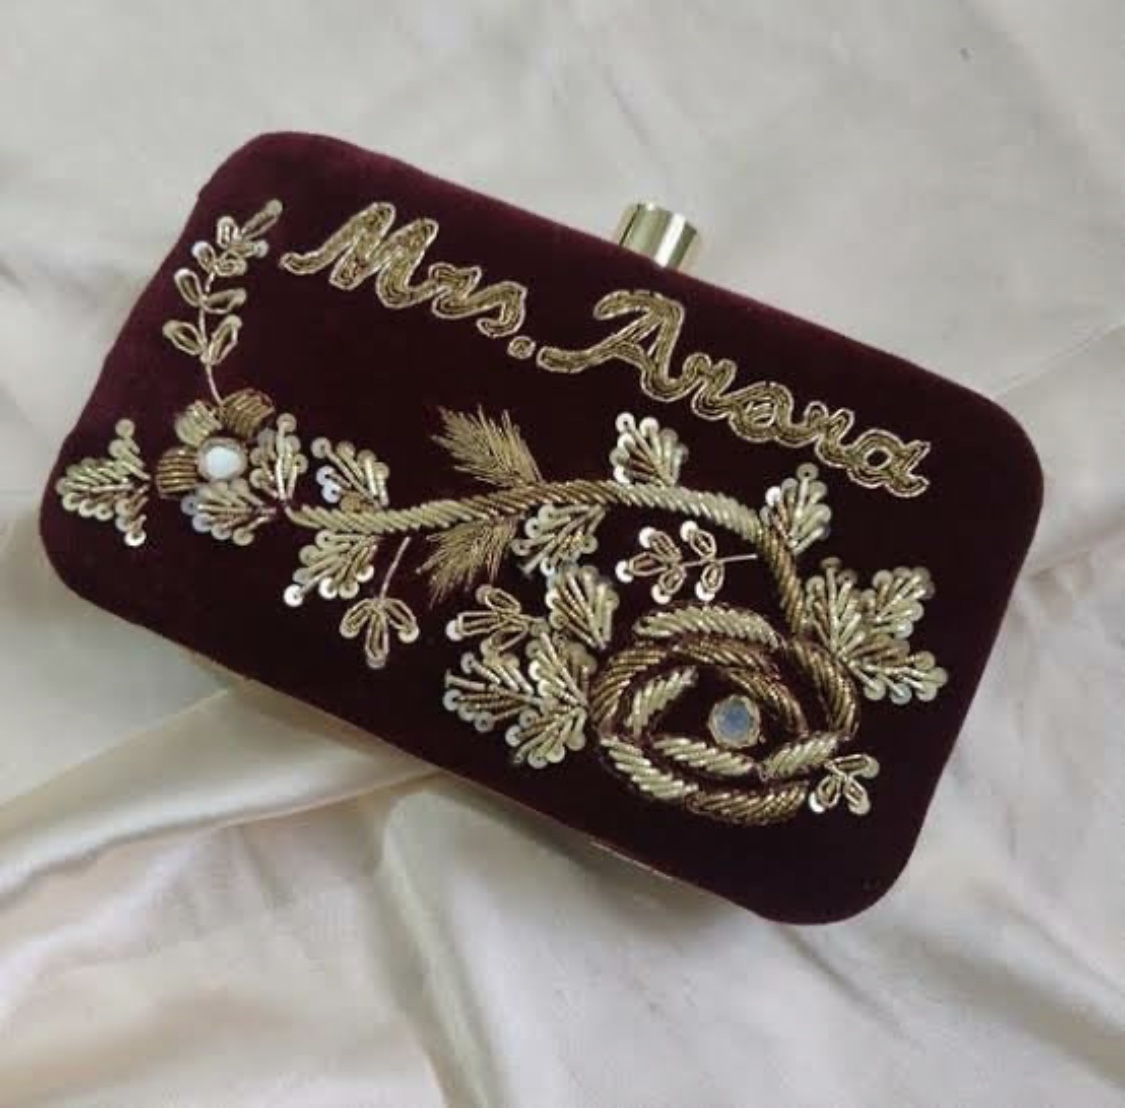 DESIGN ELLE Customized Artwork Clutch Bag Purse Wallet for Girls  Personalized with Any Name Ladies Hand Purse, Birthday or Anniversary or  Valentine's Day Personalized Gift for Girls : Amazon.in: Bags, Wallets and